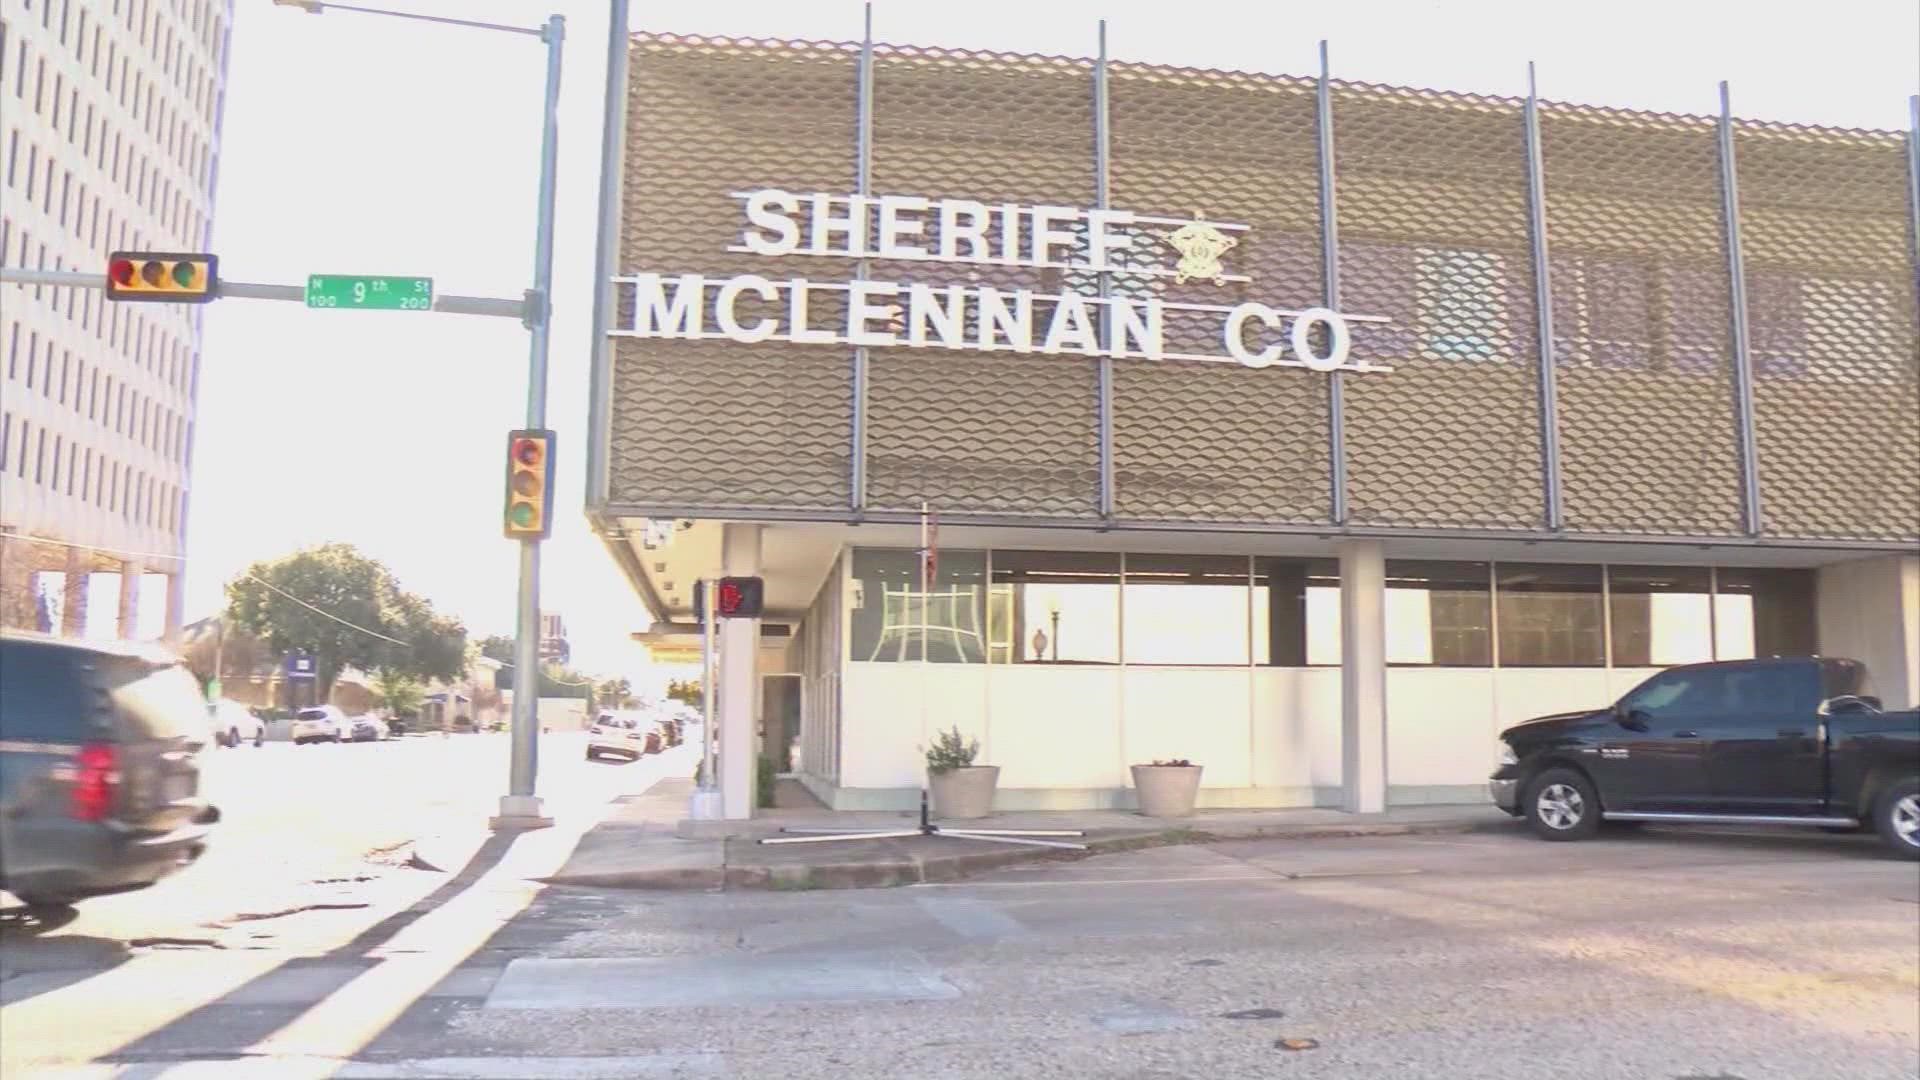 According to the McLennan County Sheriff's Office, Leonard Newman, 32, was detained and charged with many sex offenses on Saturday.